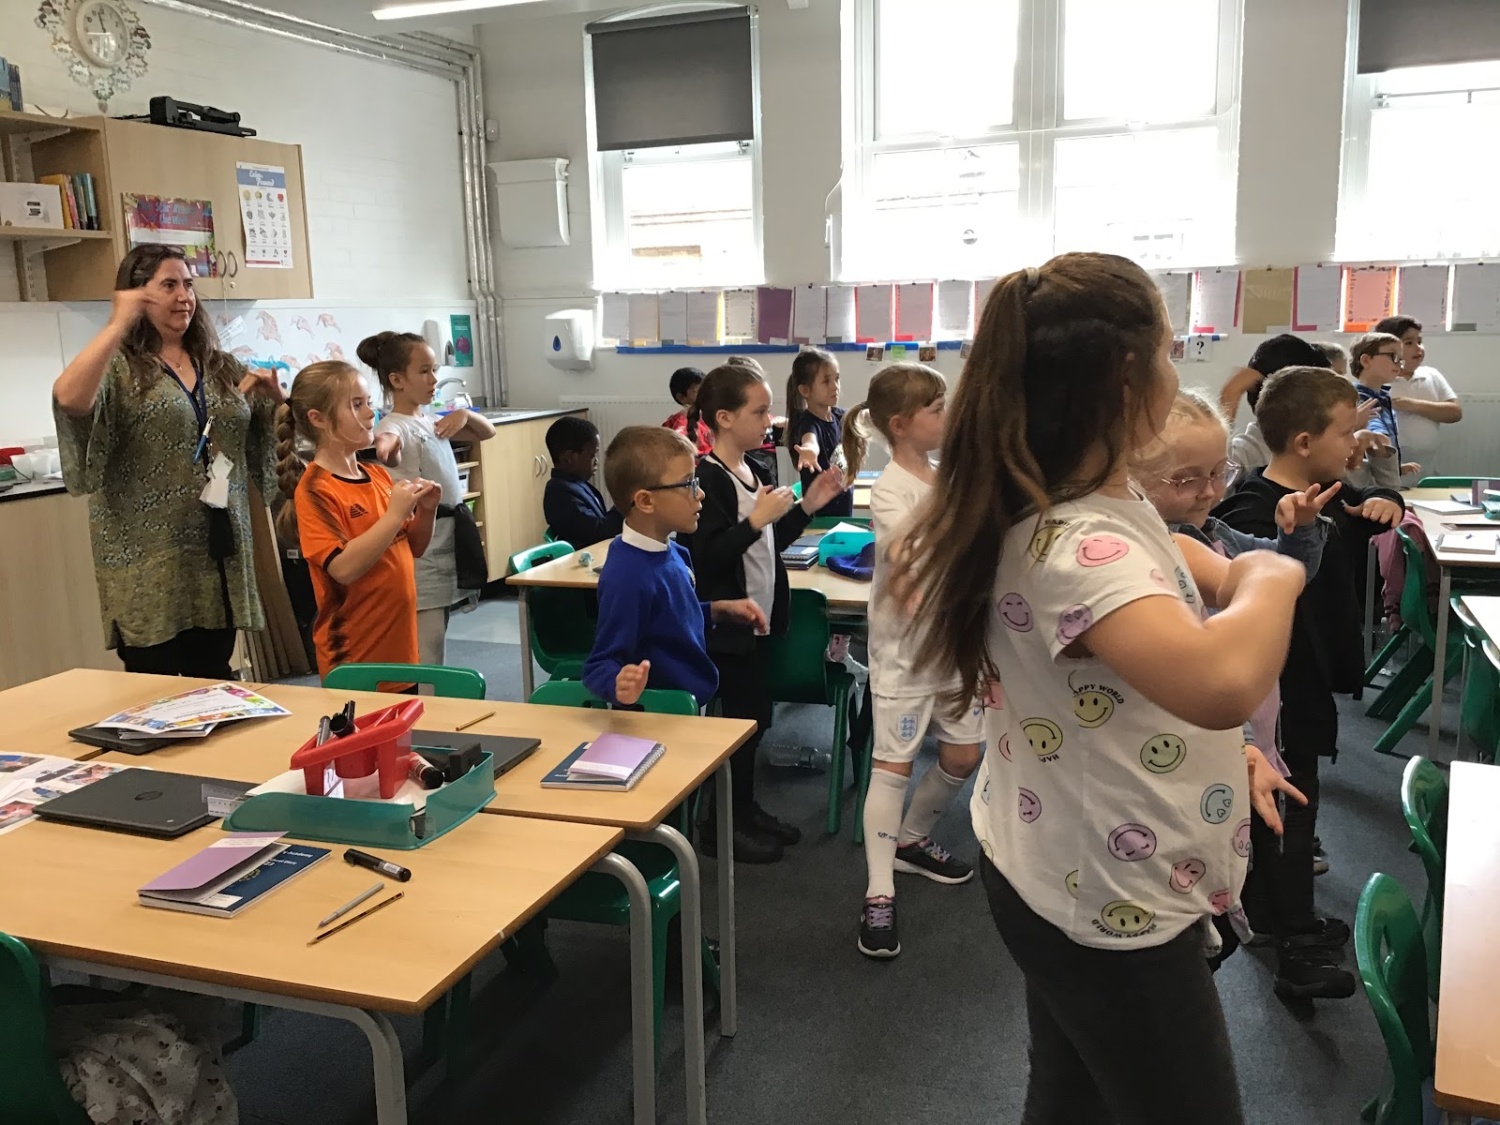 A class of young pupils are pictured stood behind their chairs in their classroom, participating in a dance activity, whilst under the supervision of a member of staff.